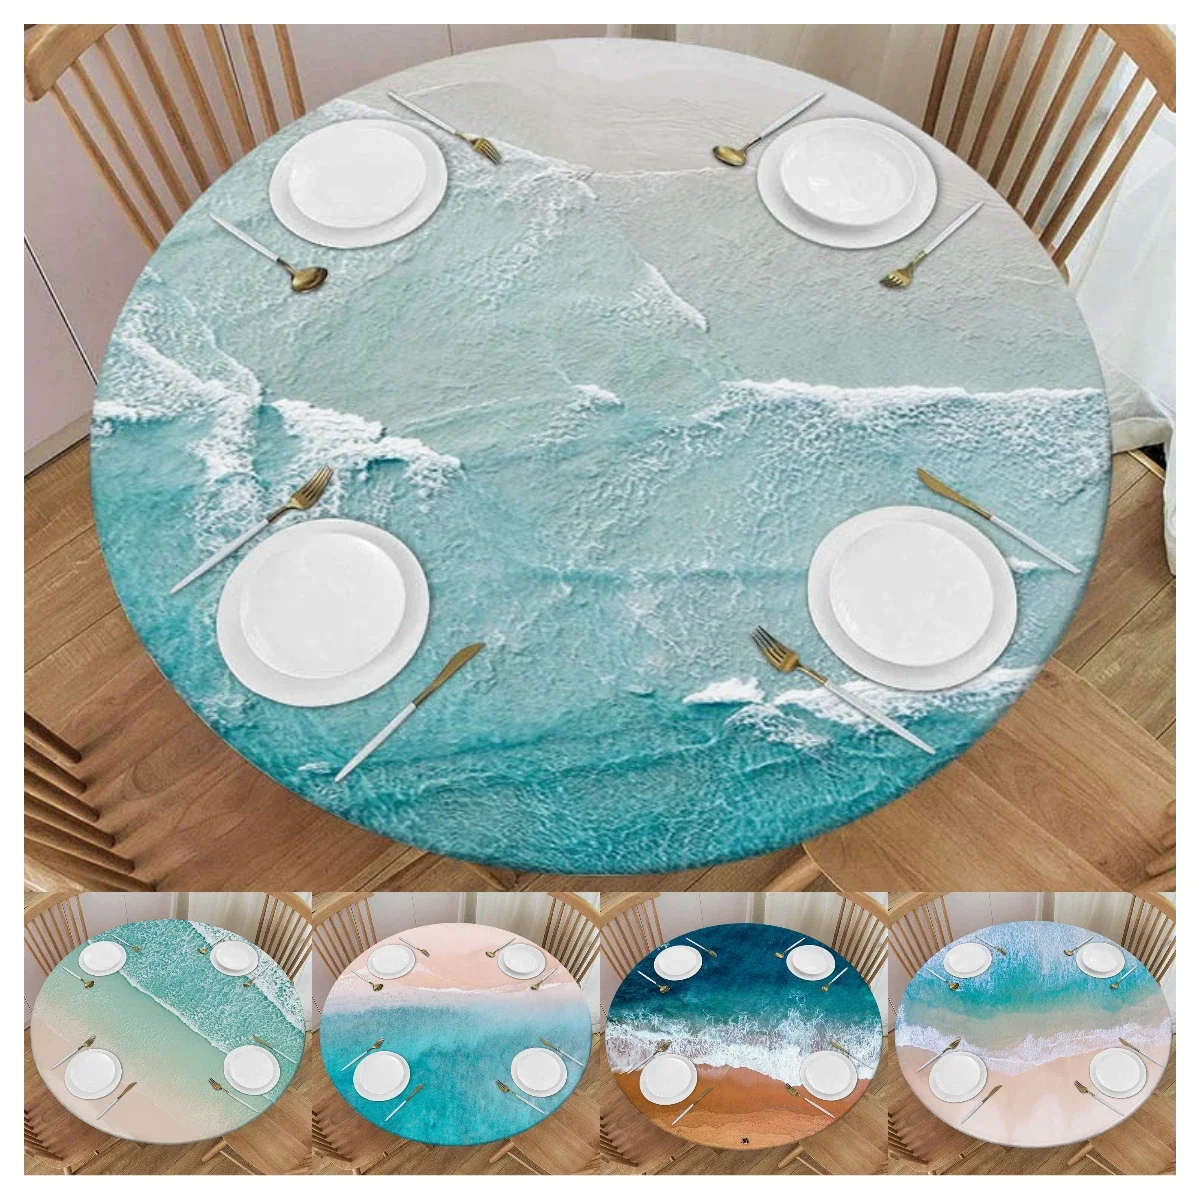 

Sea Round Fitted Tablecloth with Elastic Waterproof Wipeable Table Protect Cover For Indoor Outdoor Kitchen Dinner Desk Decorat